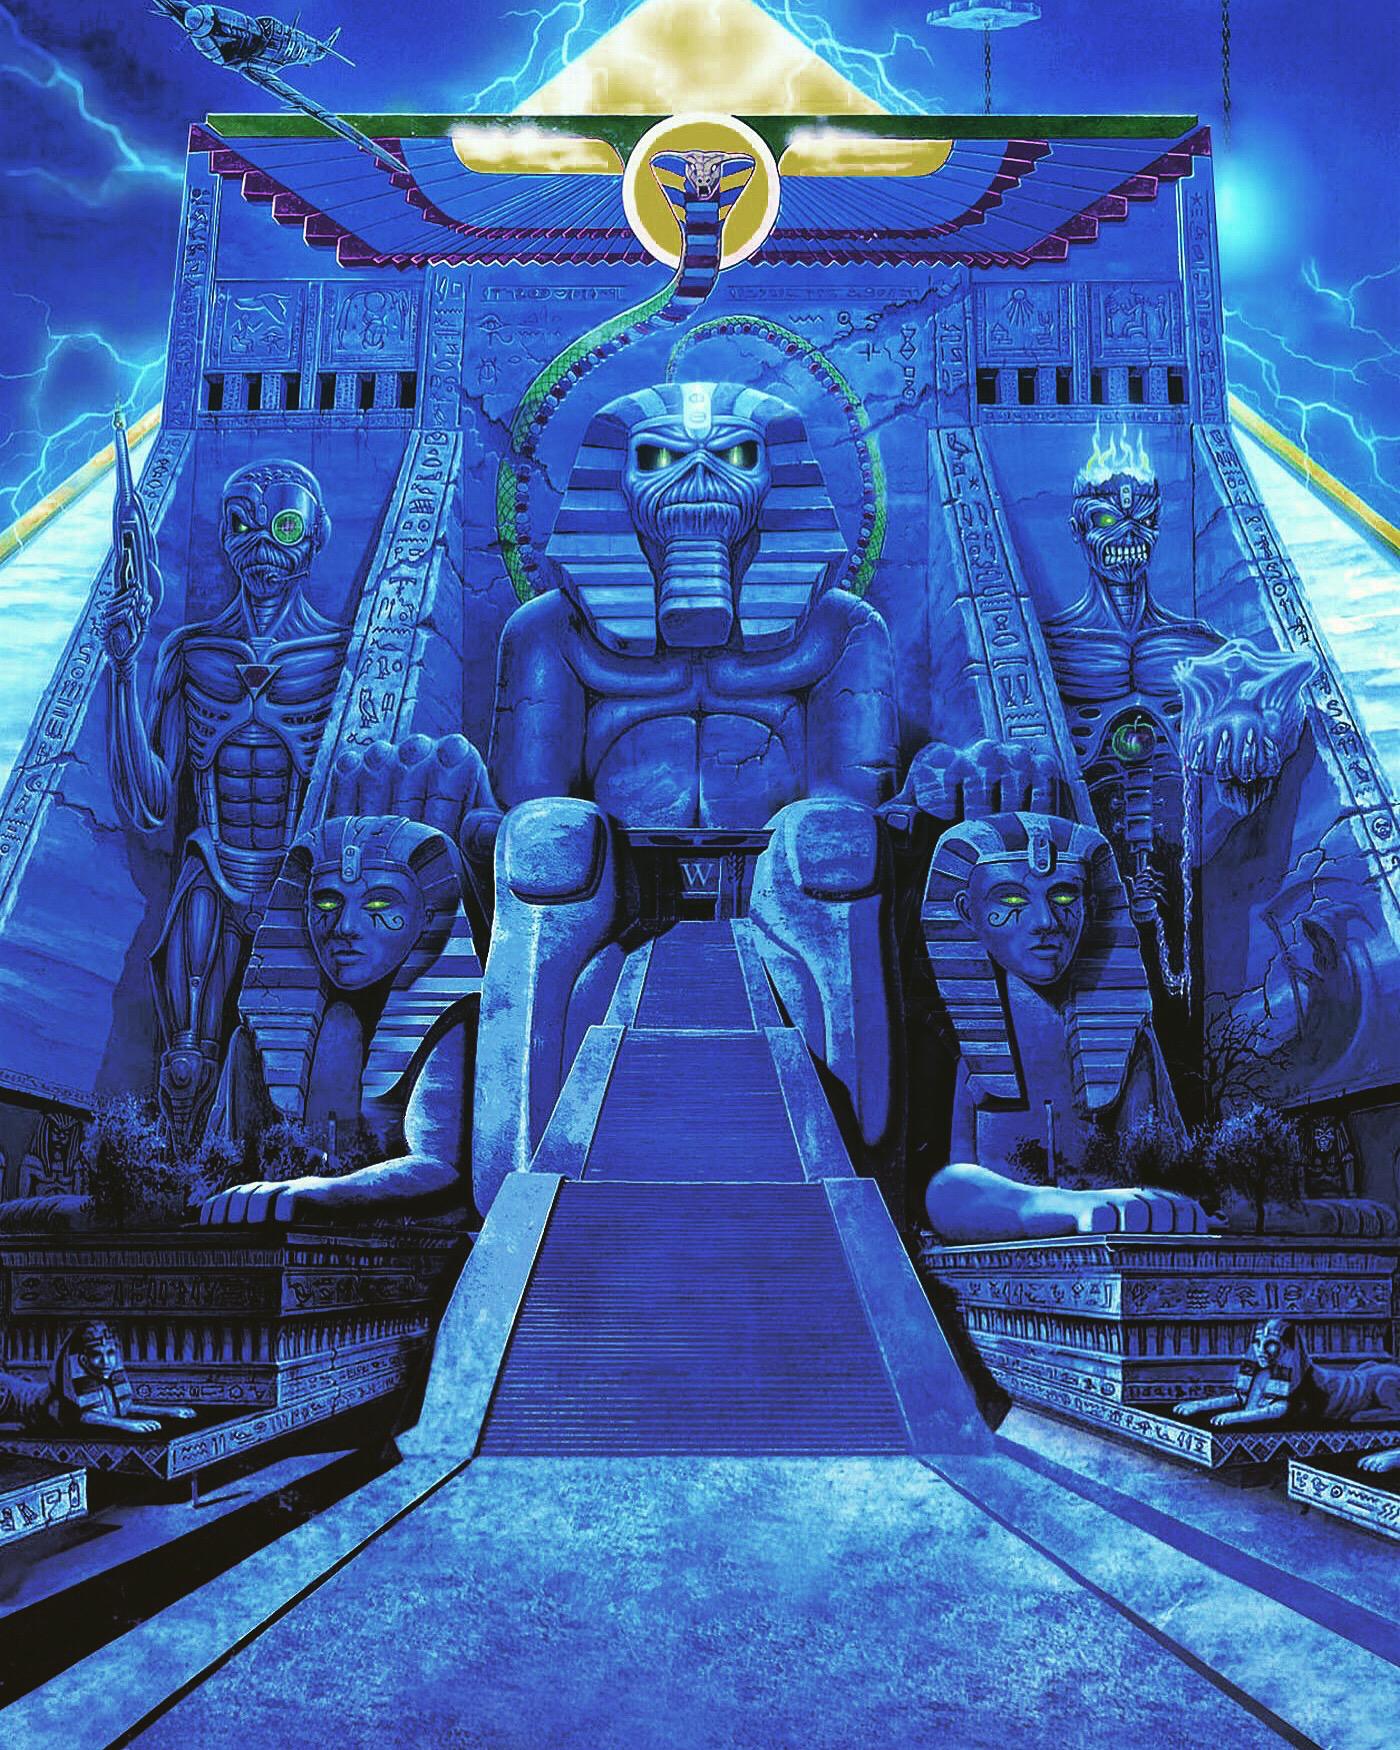 Wallpaper ID: 569089 / Iron Maiden, Band (Music), Powerslave, 1080P free  download